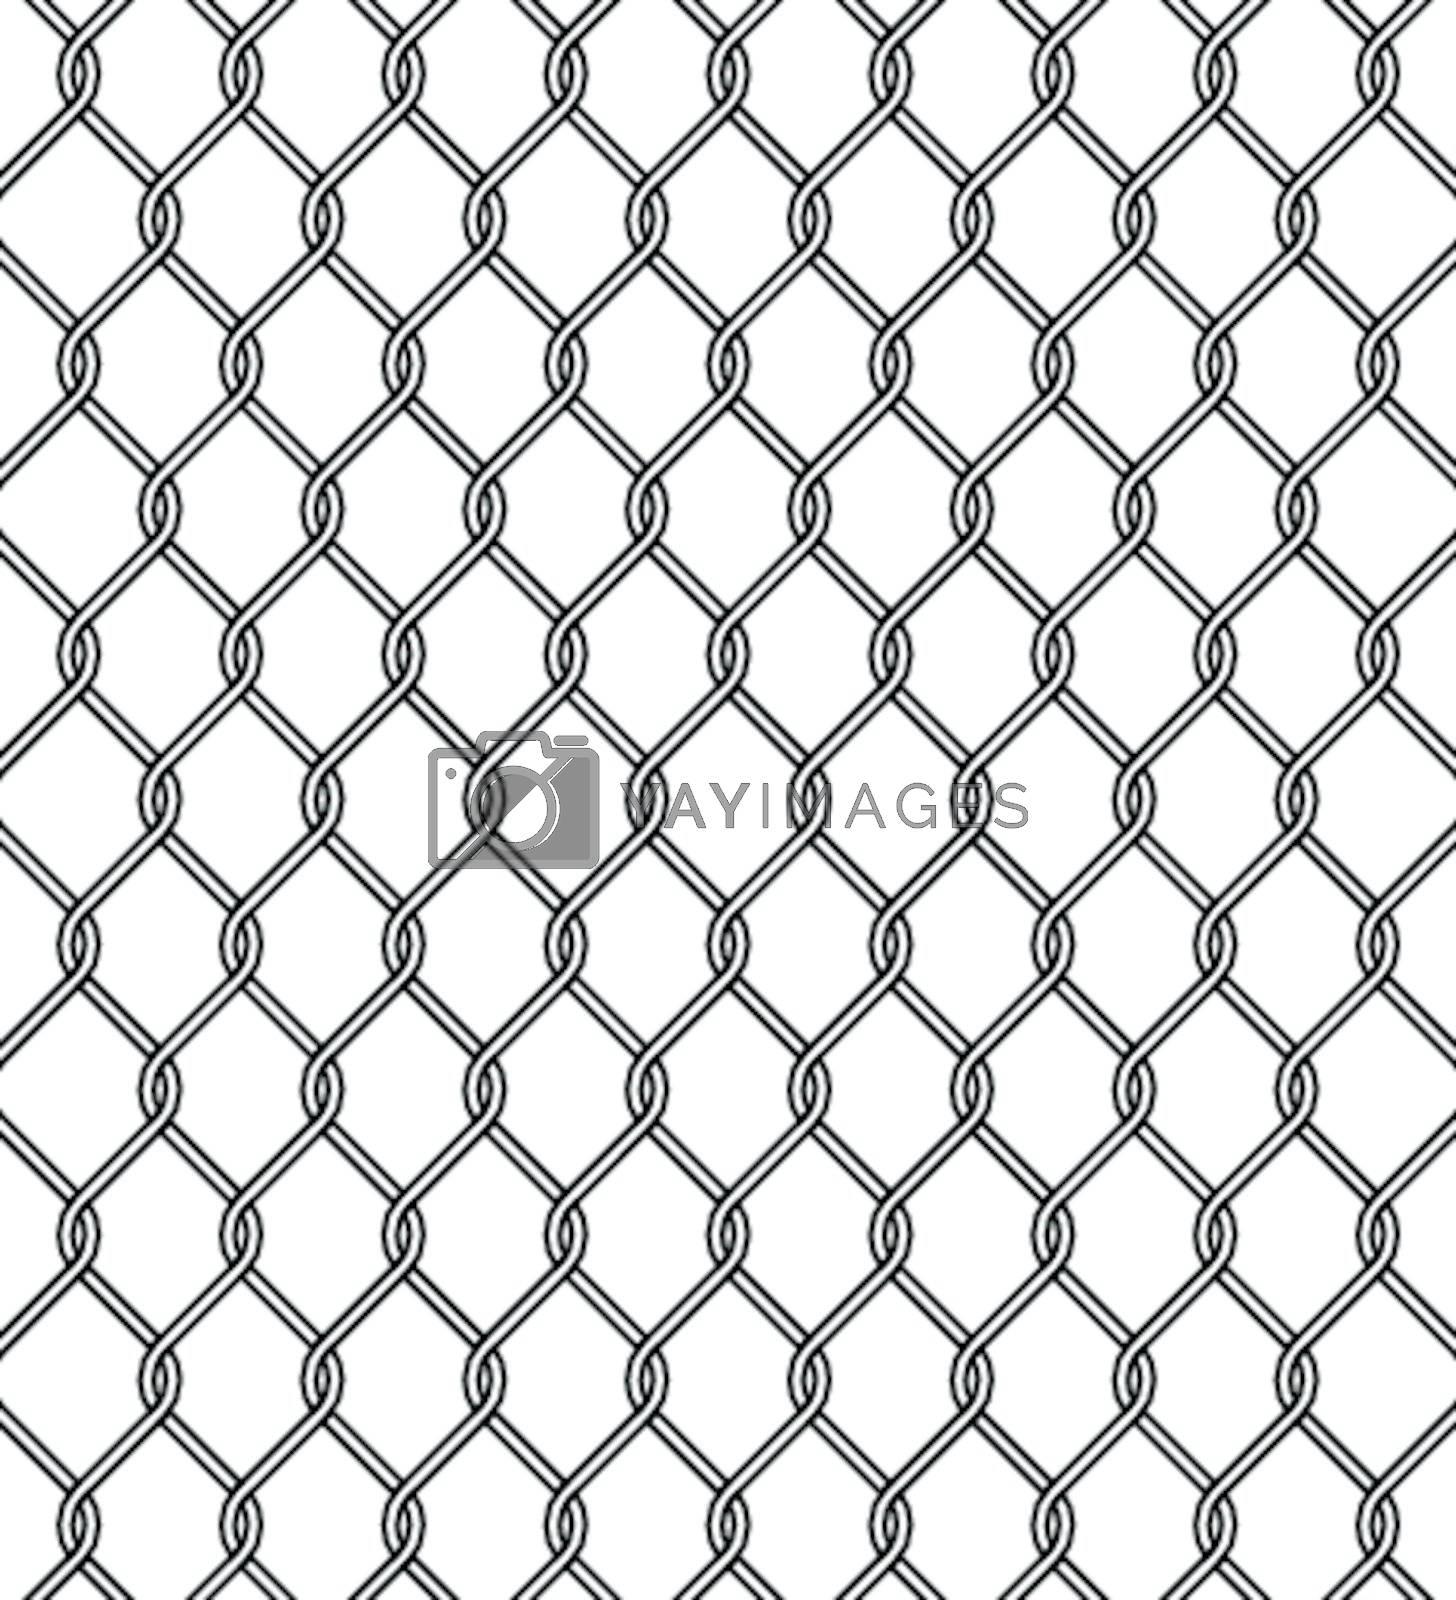 Royalty free image of chain link fence texture by alekup